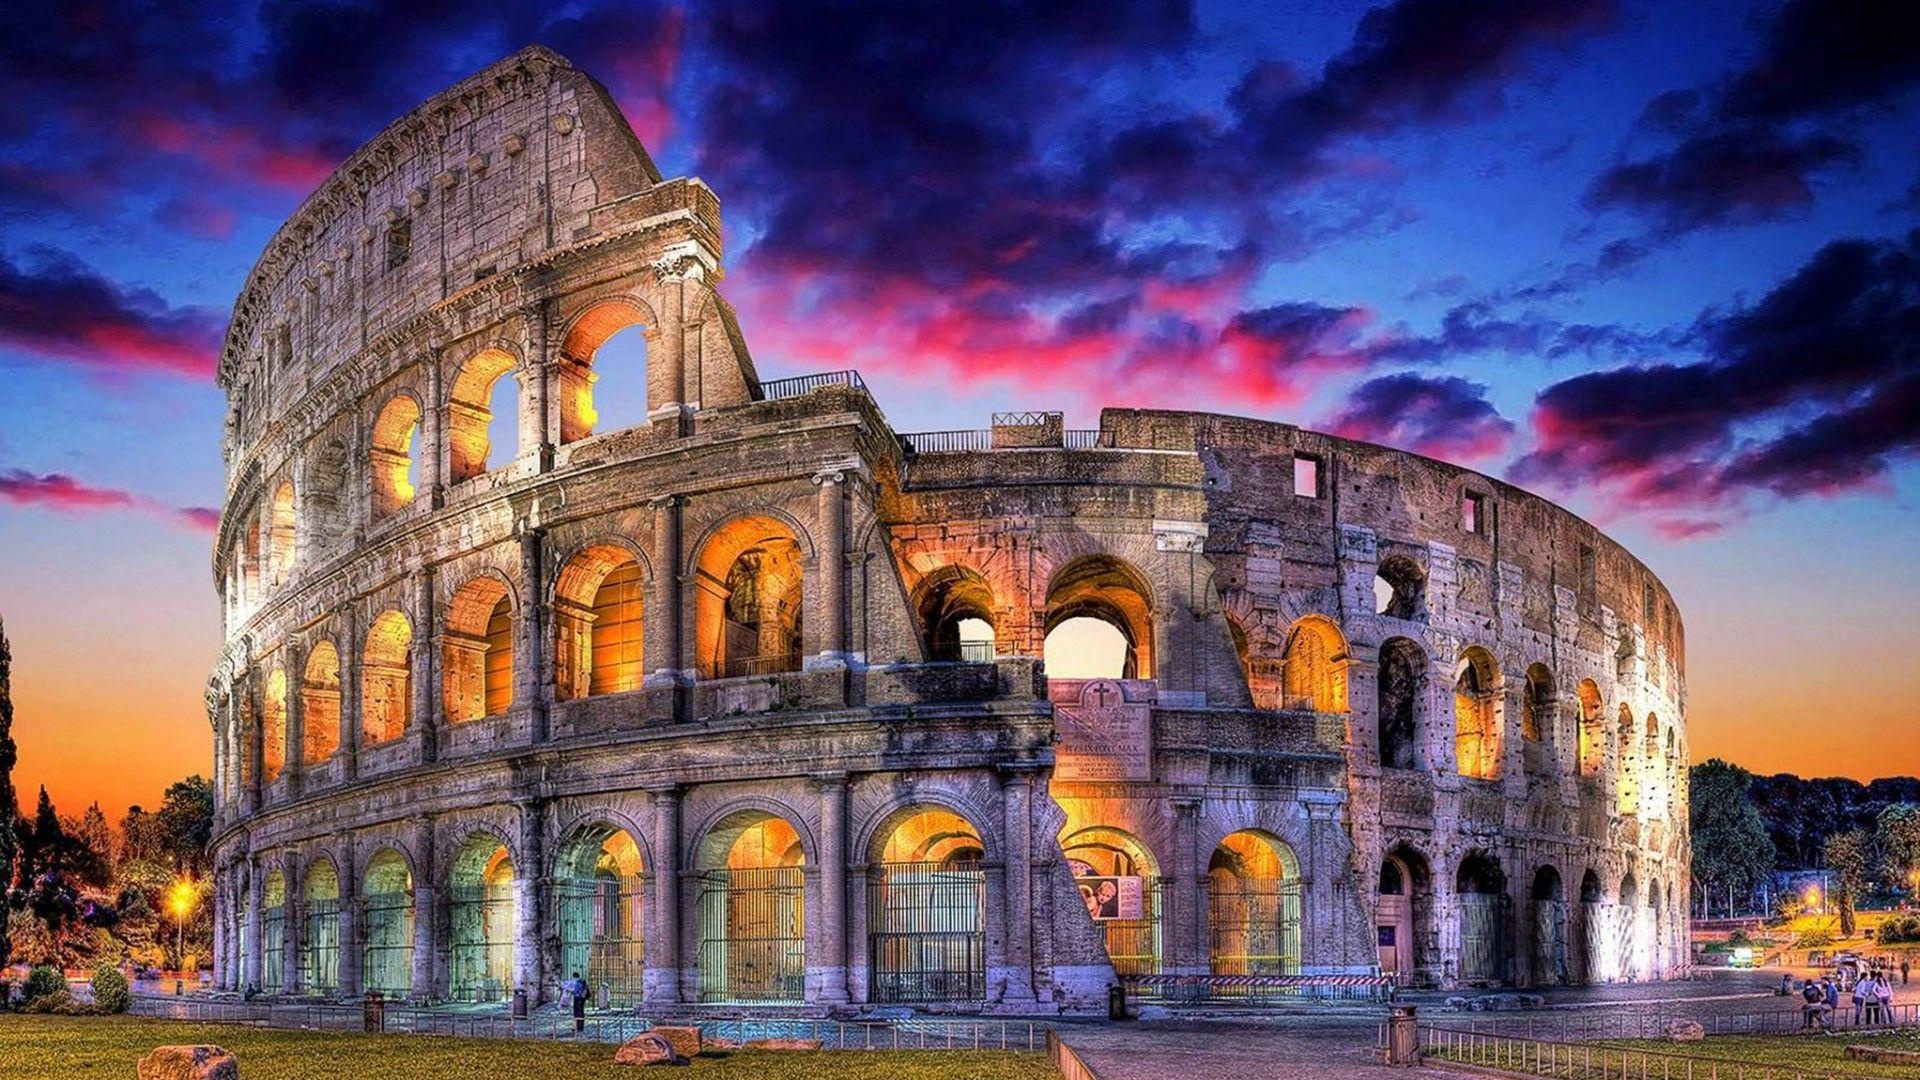 Rome: The fabulous ruins of the center of the Roman Empire. 1920x1080 Full HD Wallpaper.